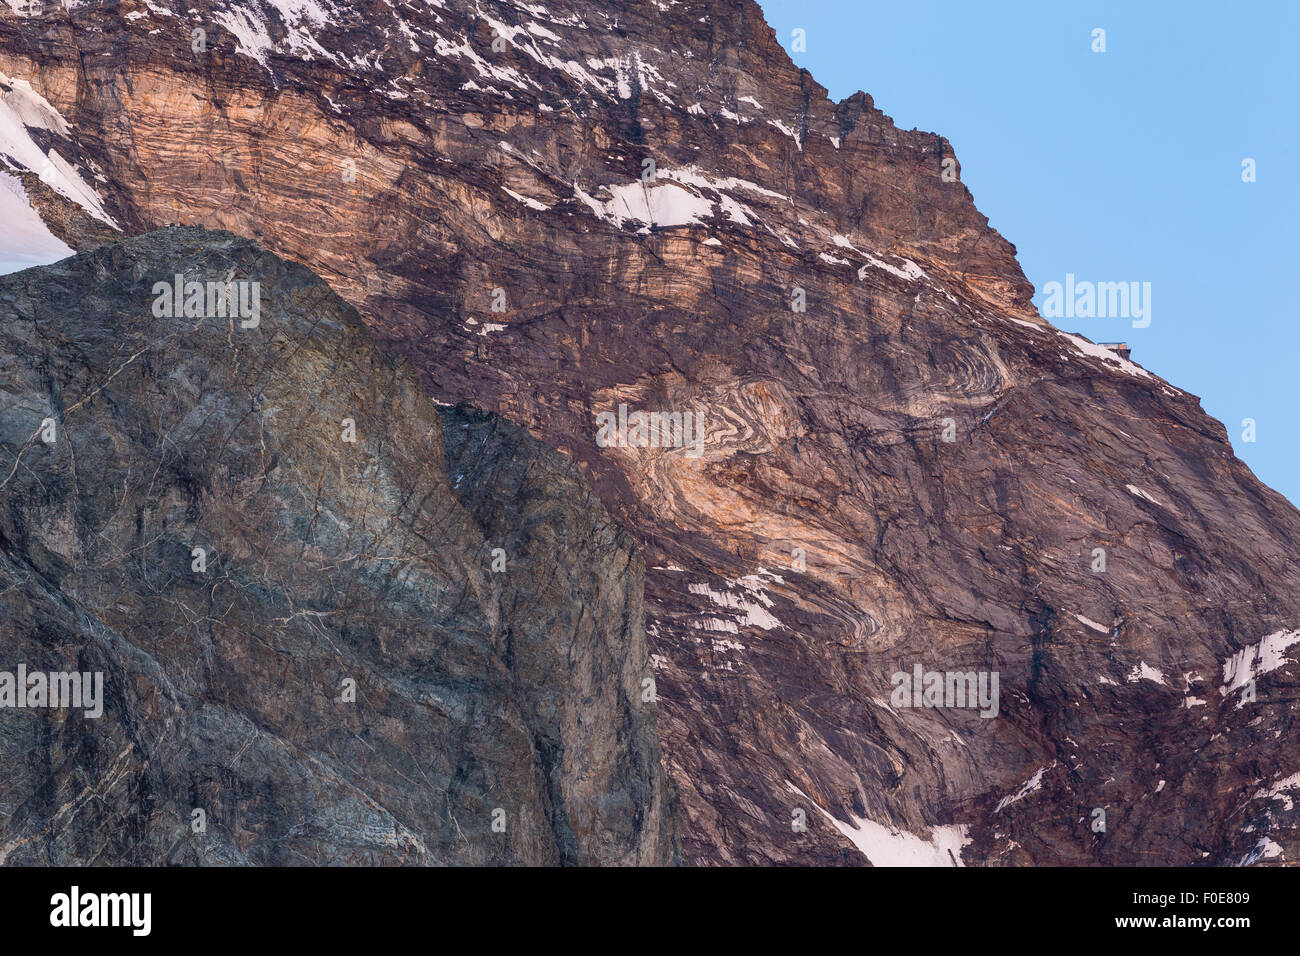 Geological features of the Matterhorn (Cervino) massif. Stock Photo